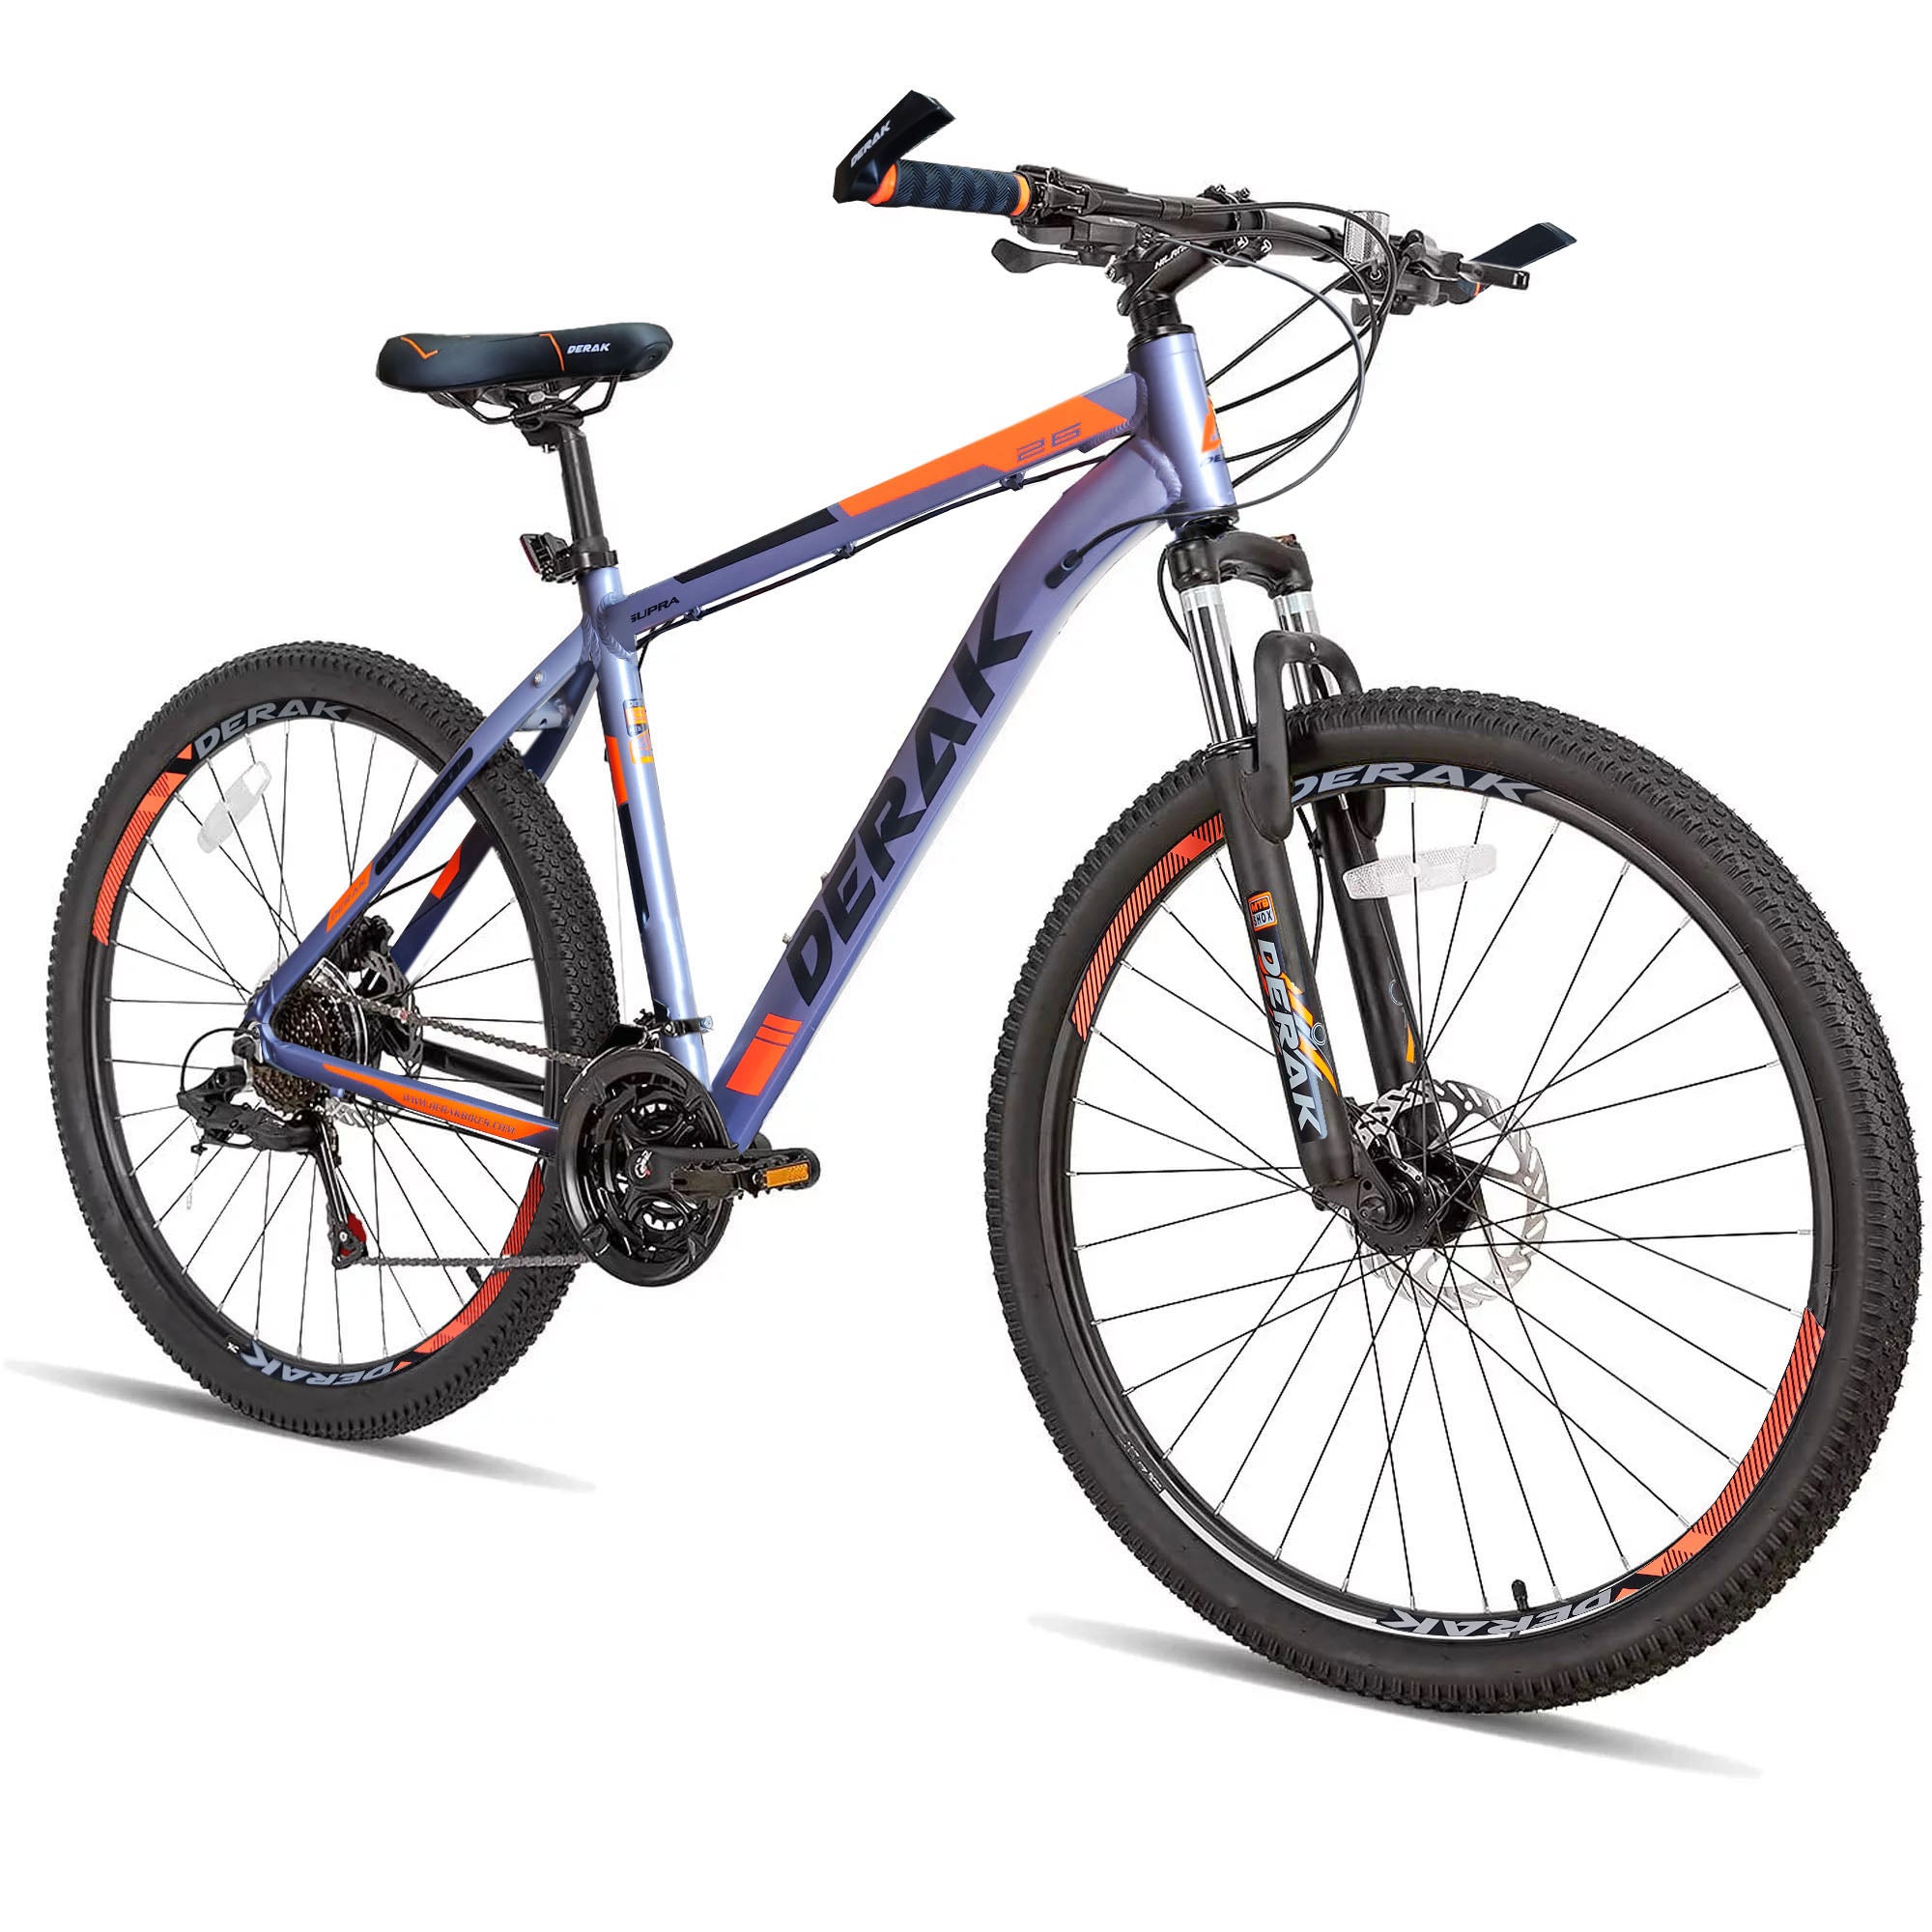 Supra 26-Inch Aluminum Frame Bicycle Disc, Suspension, 21-Speed (100% assembeled)